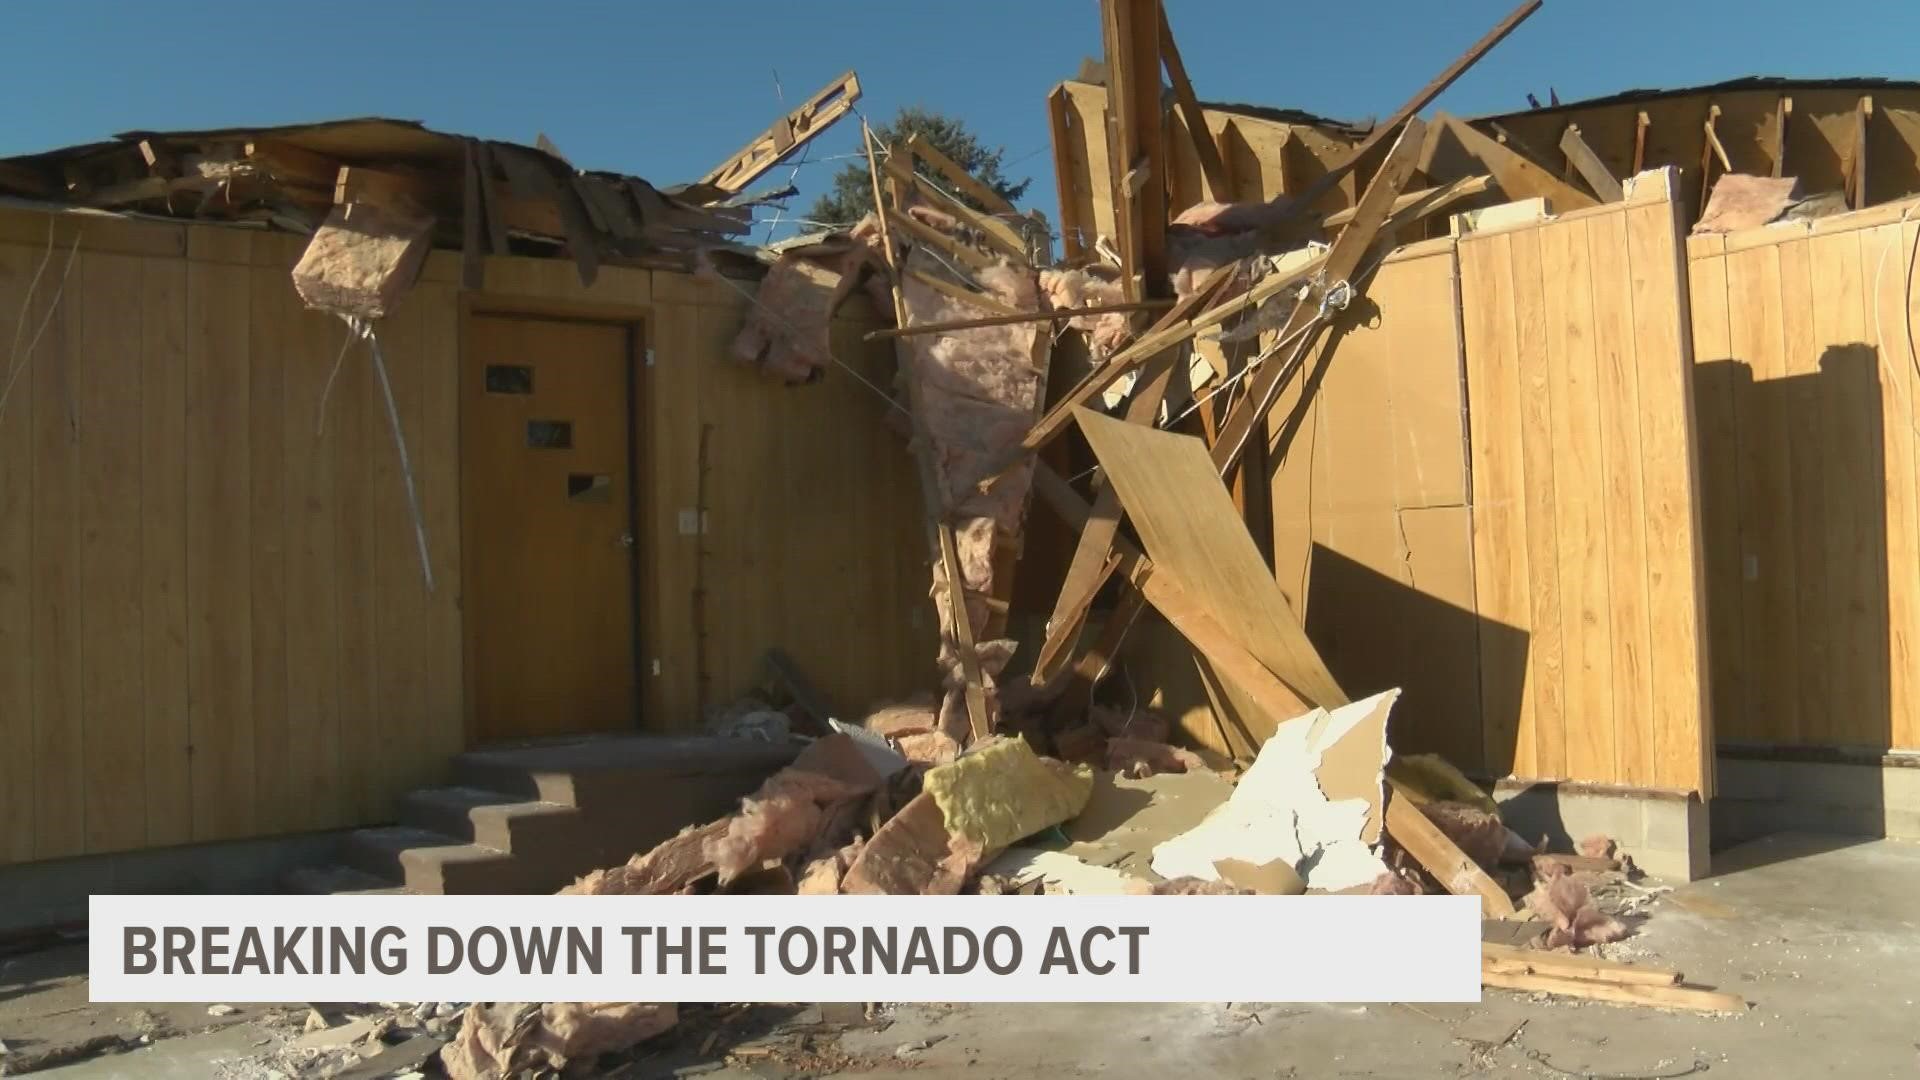 From evaluating the current tornado rating system to awarding grants to colleges and universities for improving tornado hazard communication, this bill has it all.